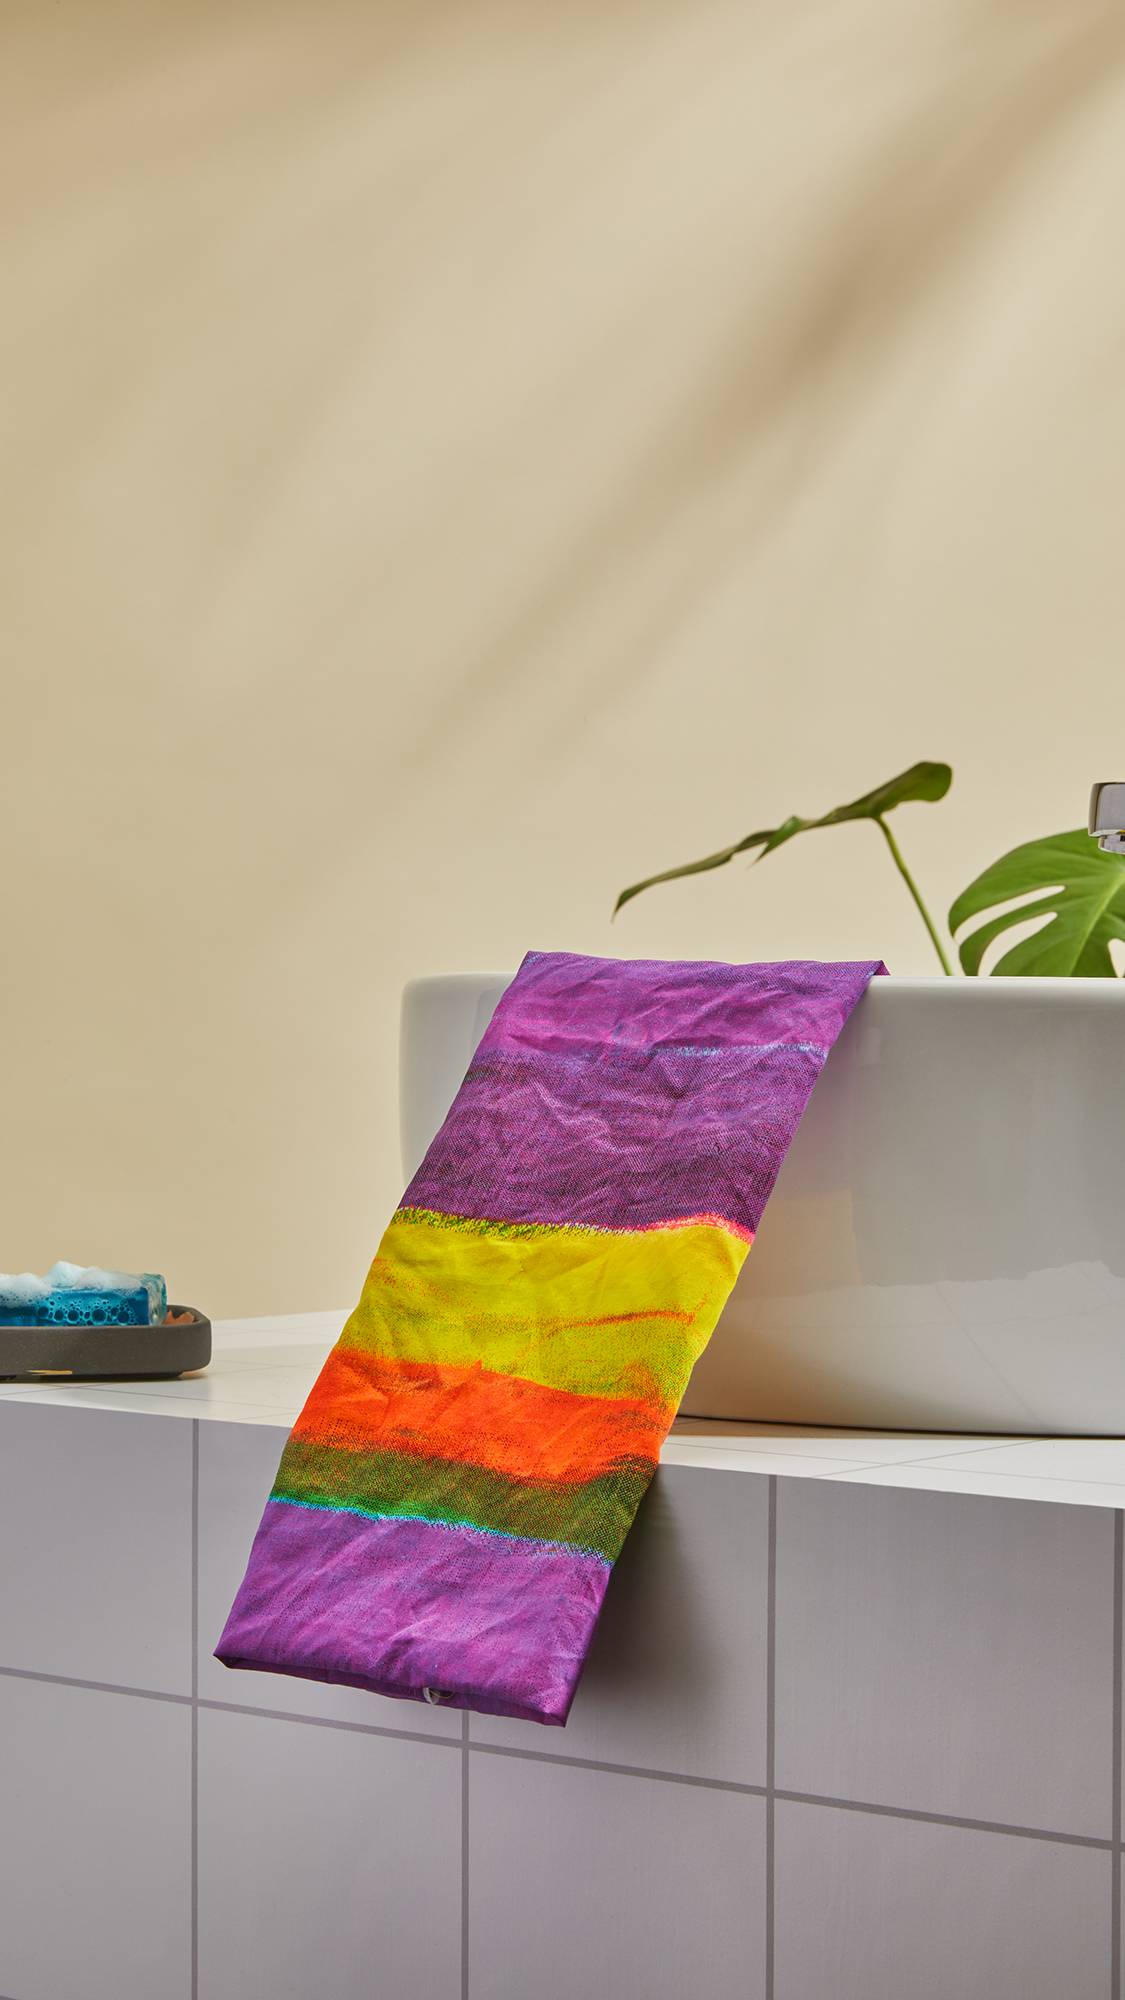 The image shows the colourful All The Colours Tenugui knot wrap folded neatly over the side of a sink as a freshly used soap slice sits beside it. 